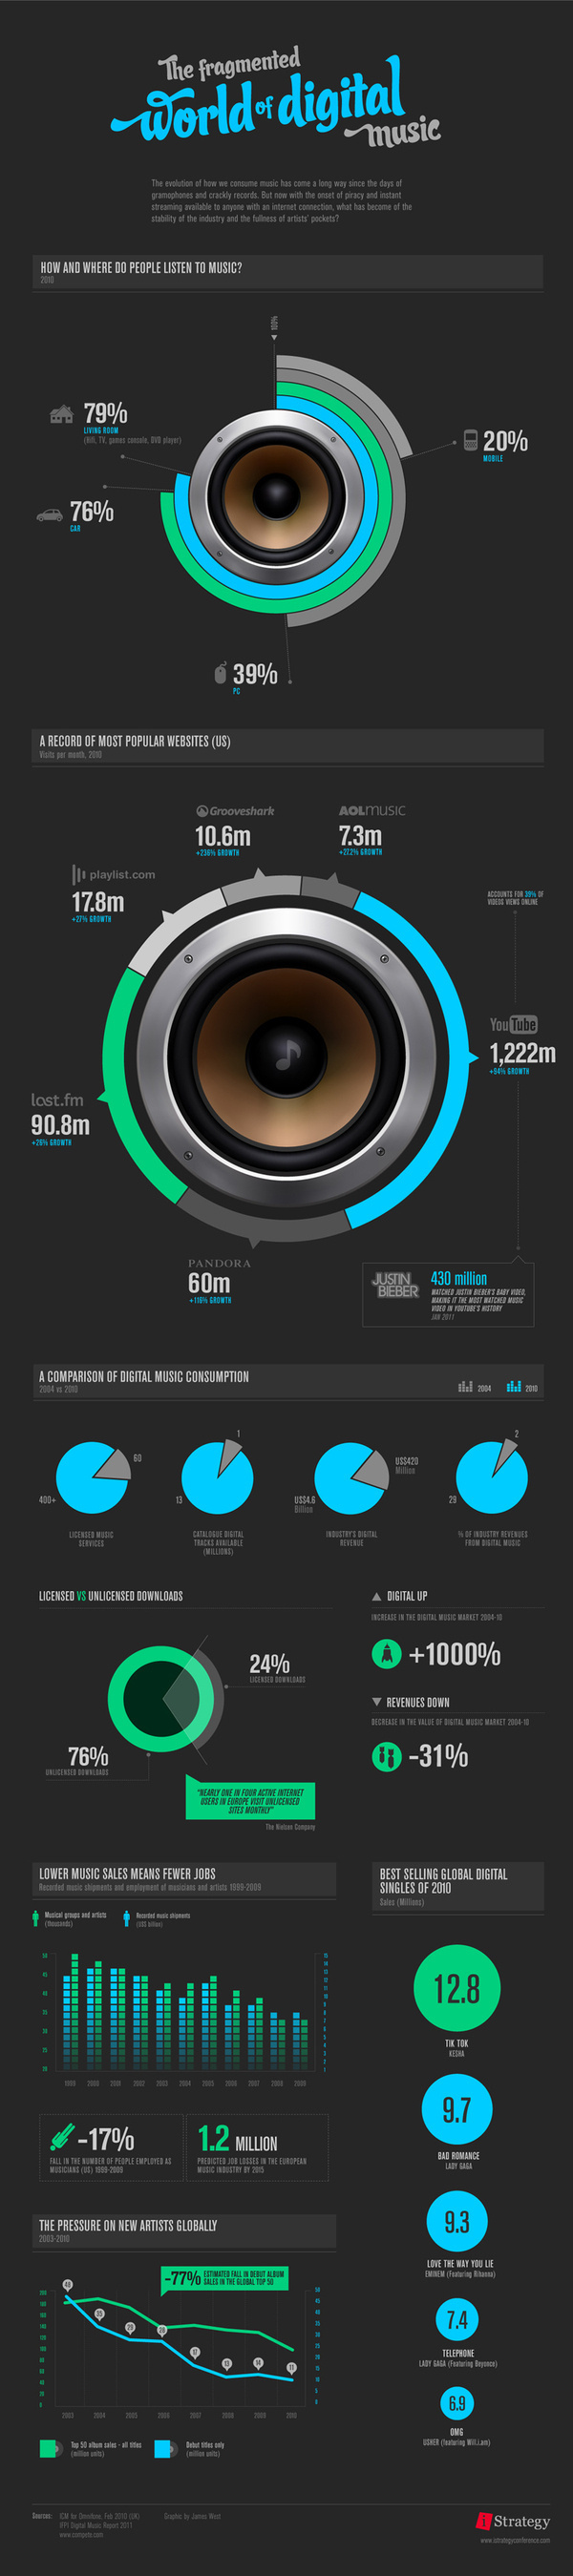 The Fragmented World of Digital Music - INFOGRAPHIC #music #digital #infographic